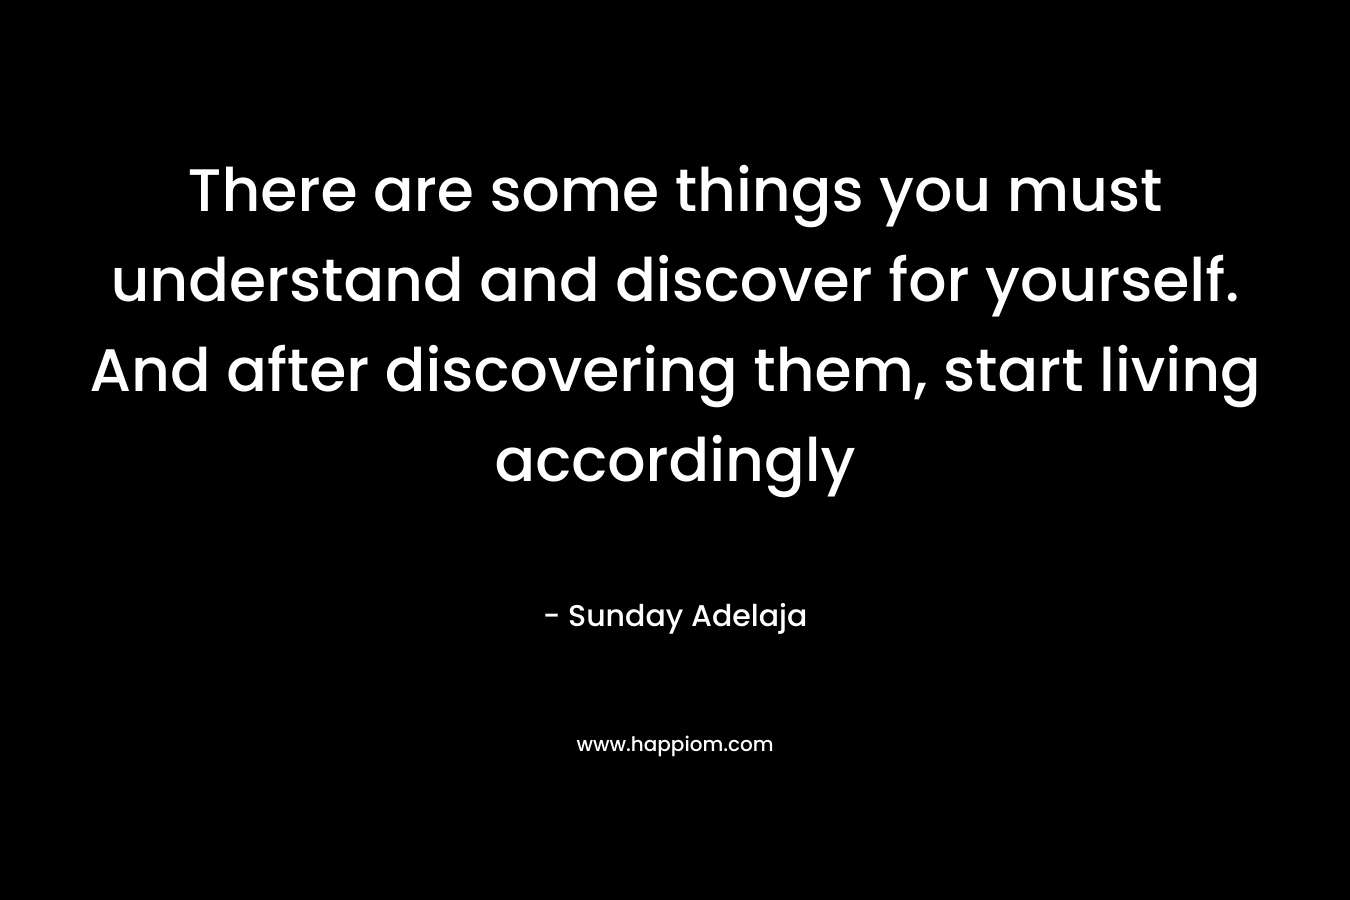 There are some things you must understand and discover for yourself. And after discovering them, start living accordingly